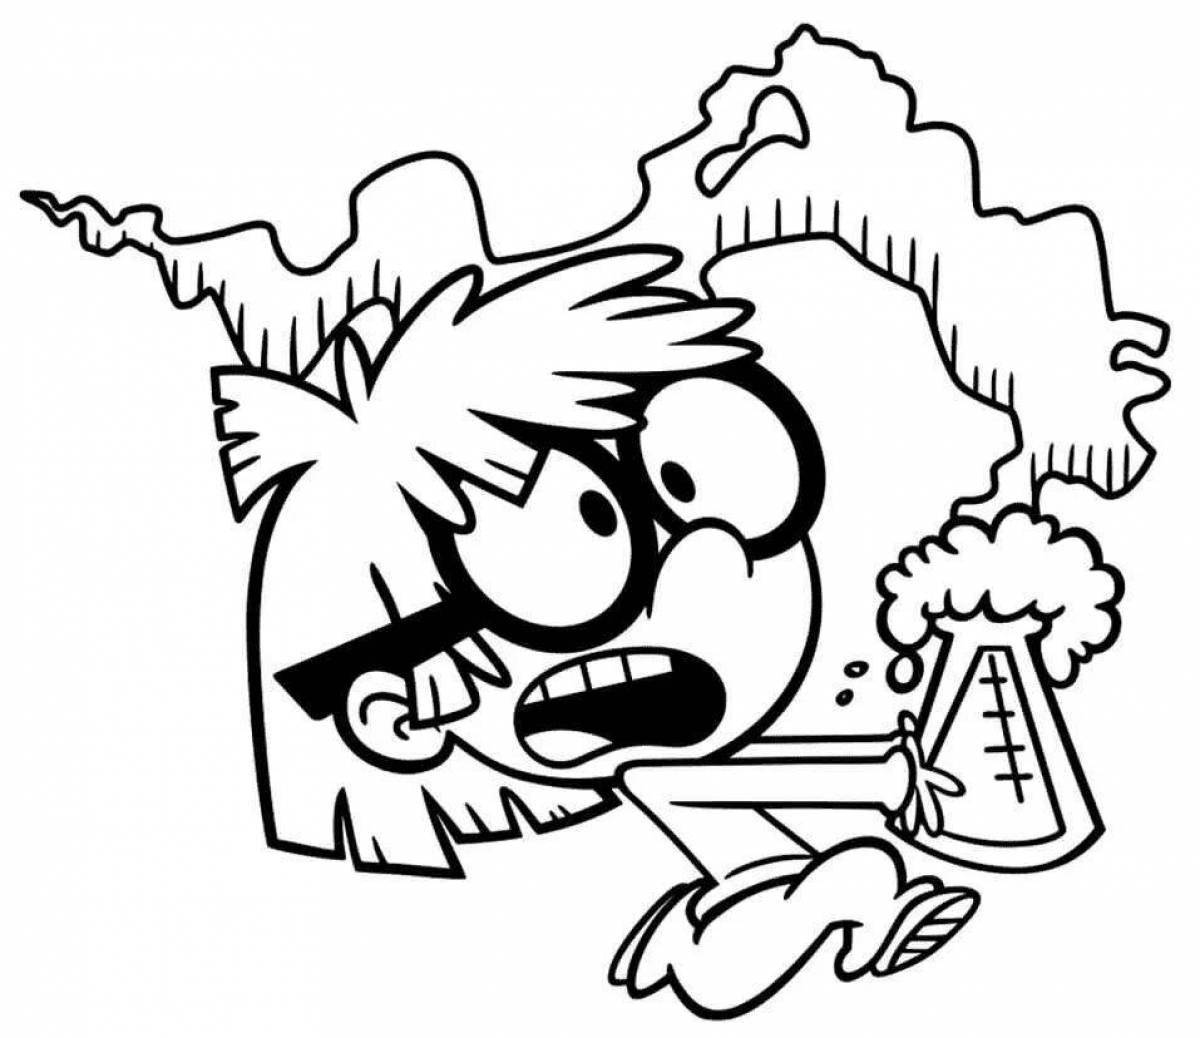 Coloring-mania noisy house coloring page